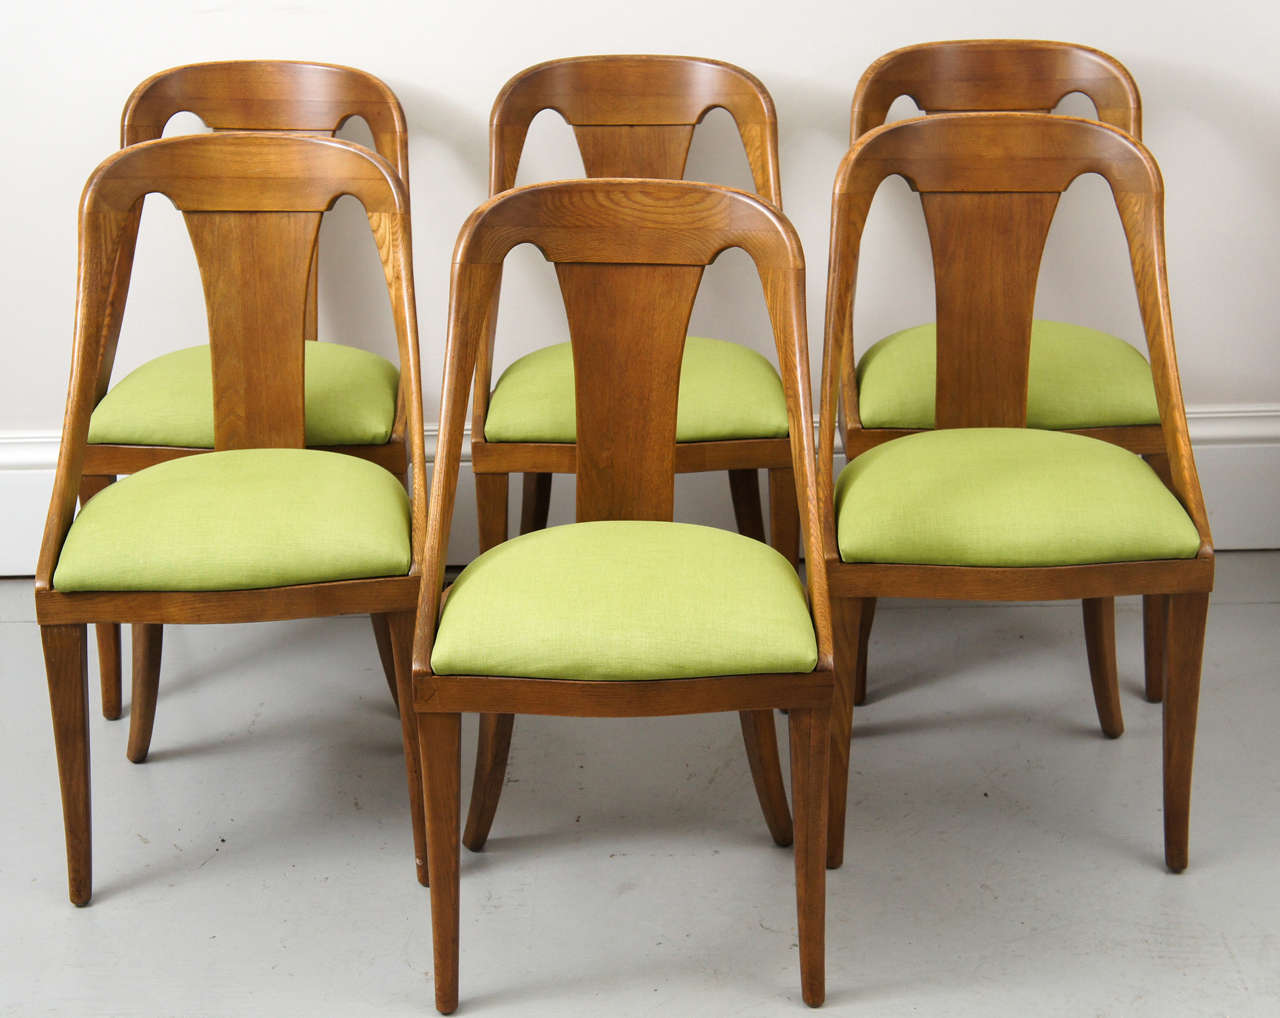 A very stylish set of six dining chairs by Jack Van der Molen for Jamestown Furniture. A classic design with a modern look. The chairs have been recently
polished.